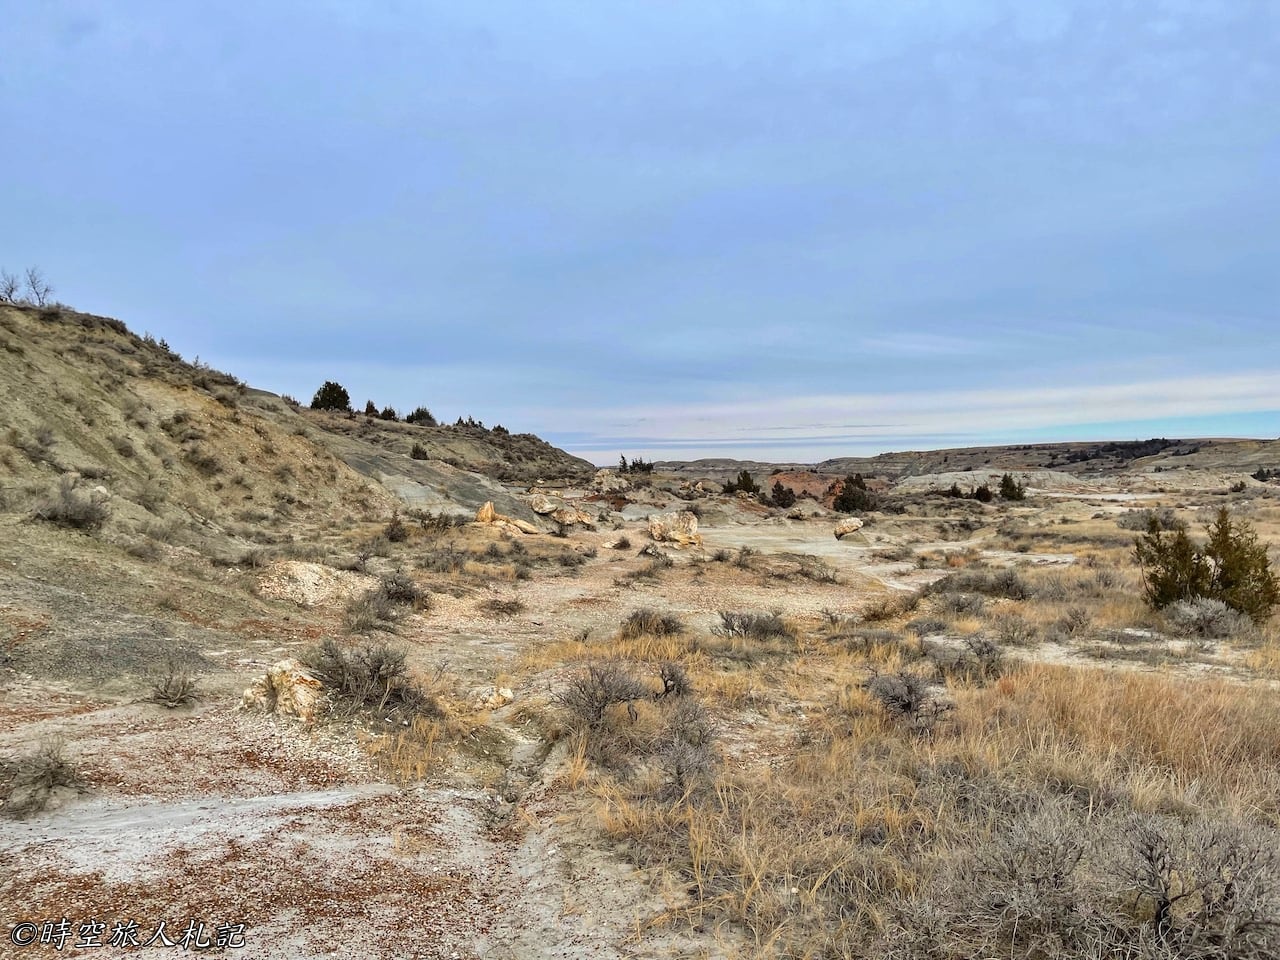 Theodore roosevelt national park,Petrified forest,羅斯福國家公園,石化林 12